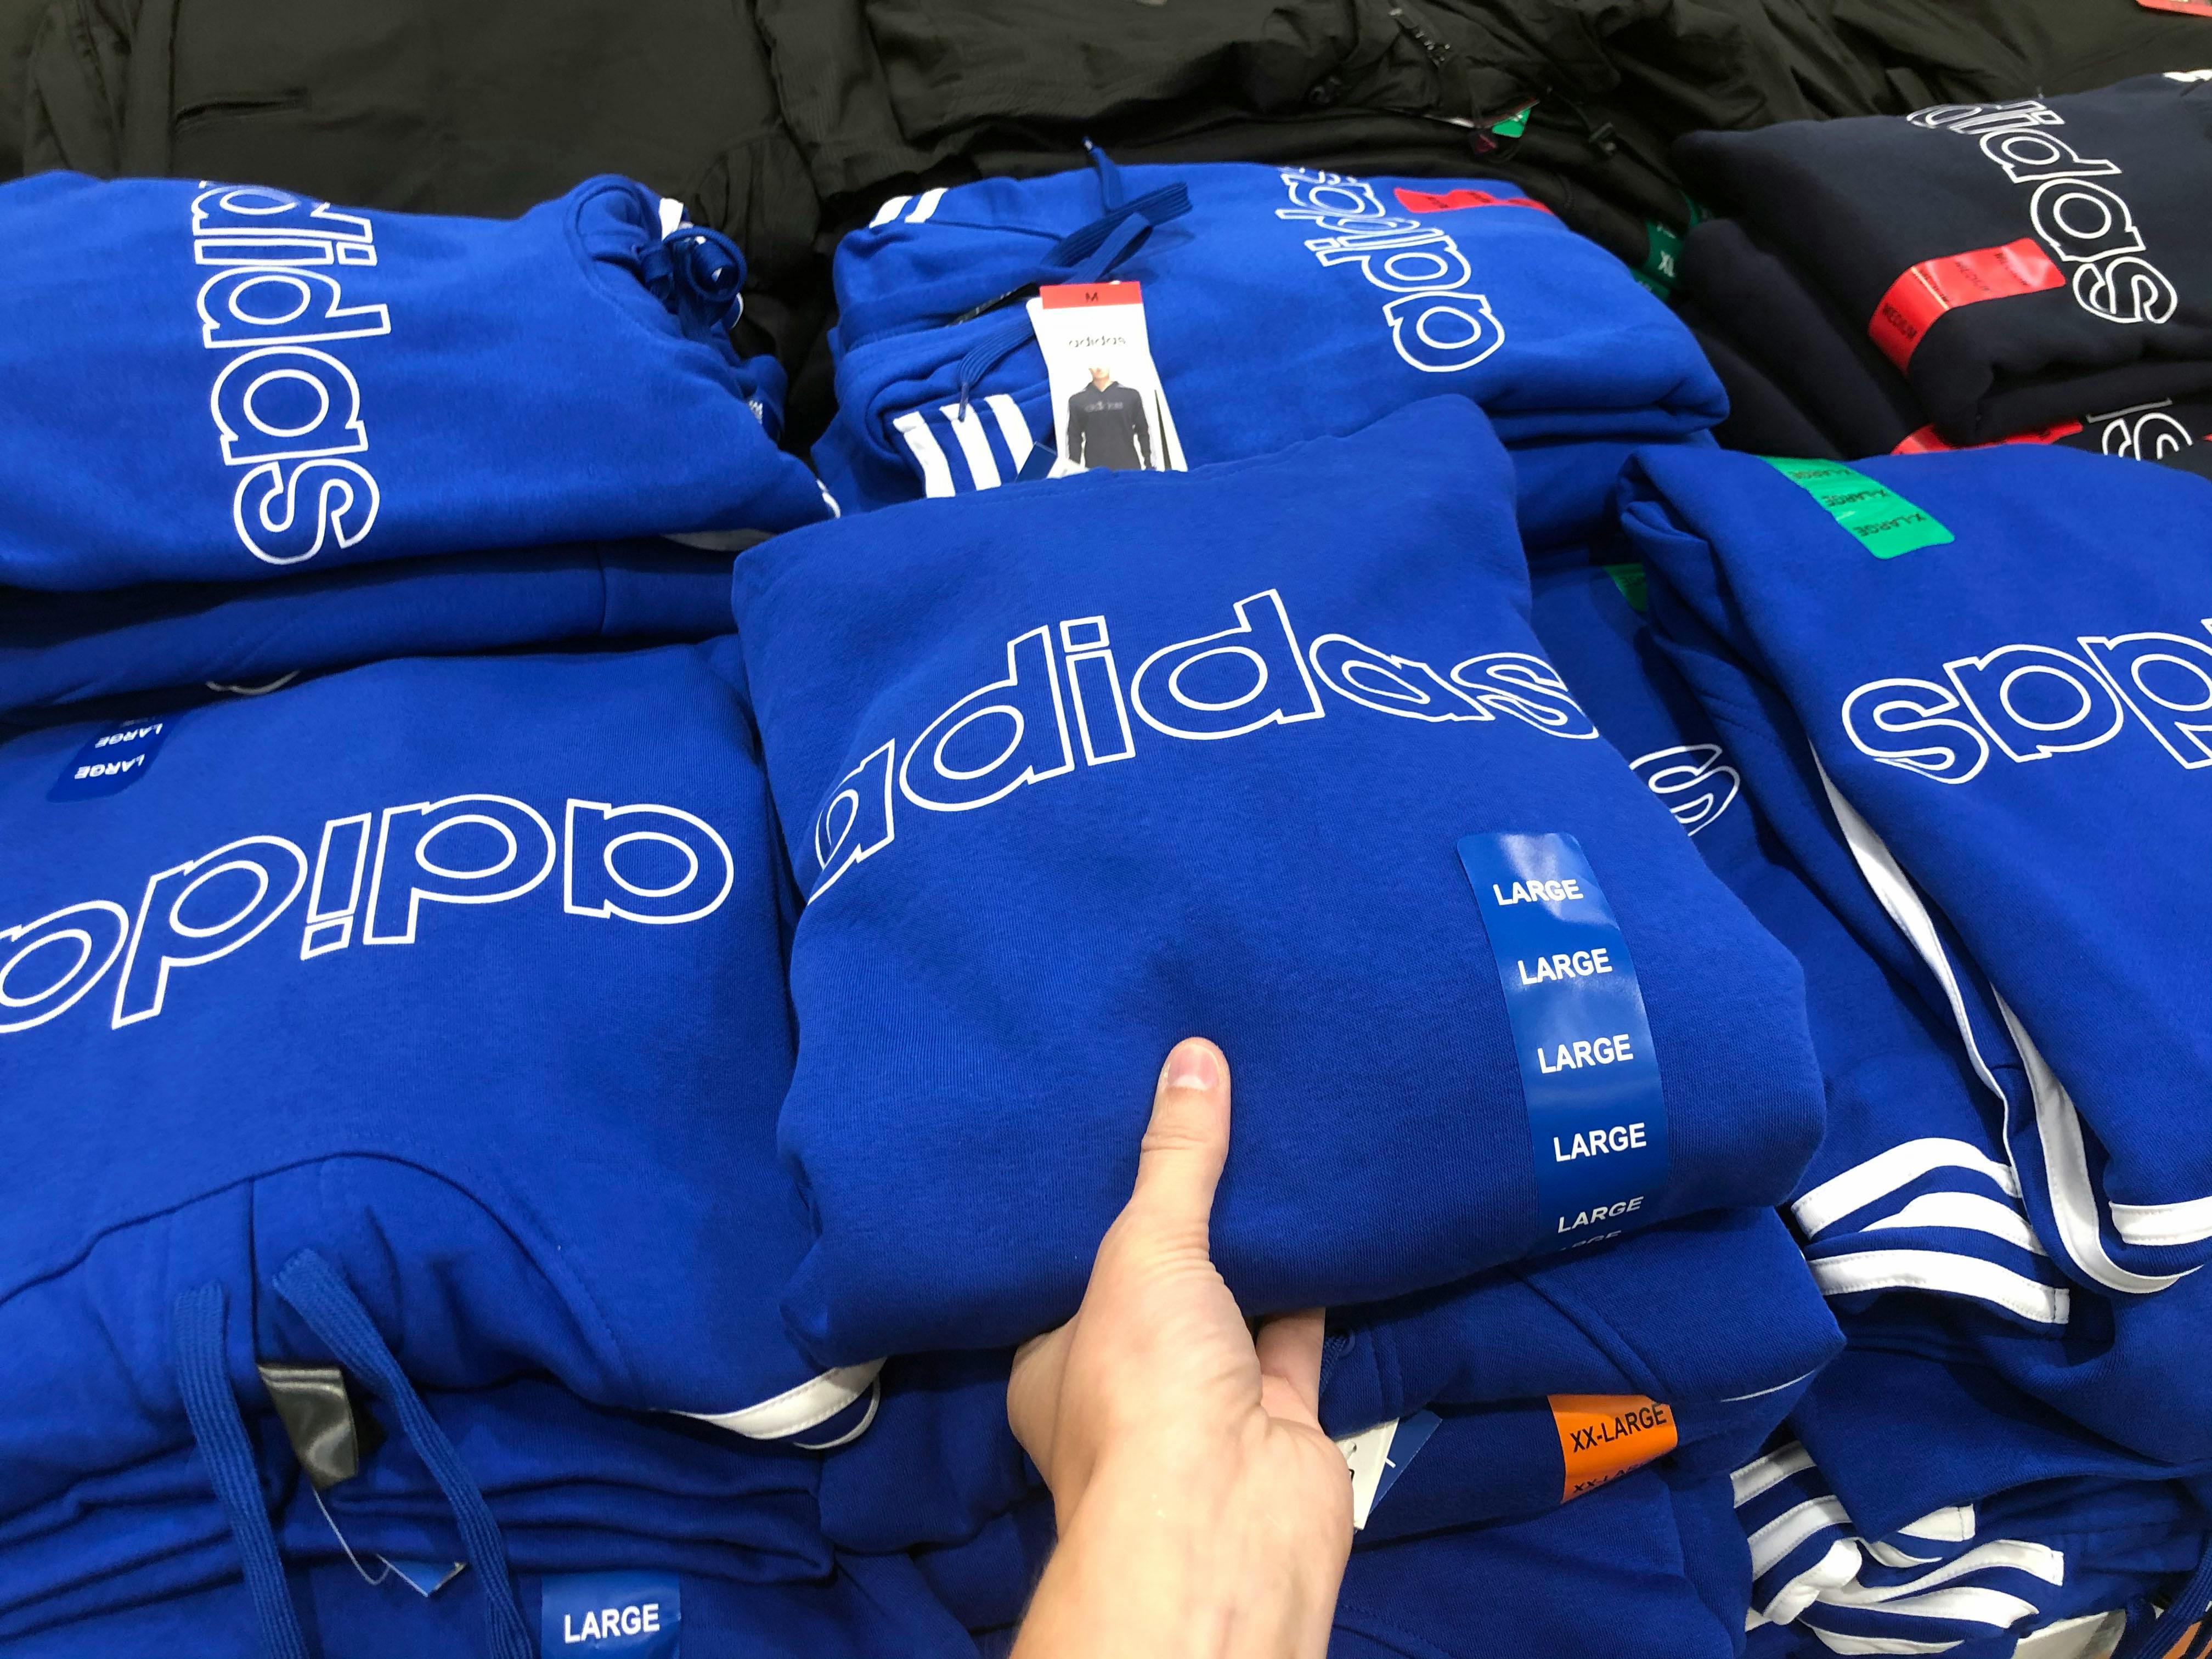 $17.99 Adidas Men's Hoodies at Costco - The Krazy Coupon Lady